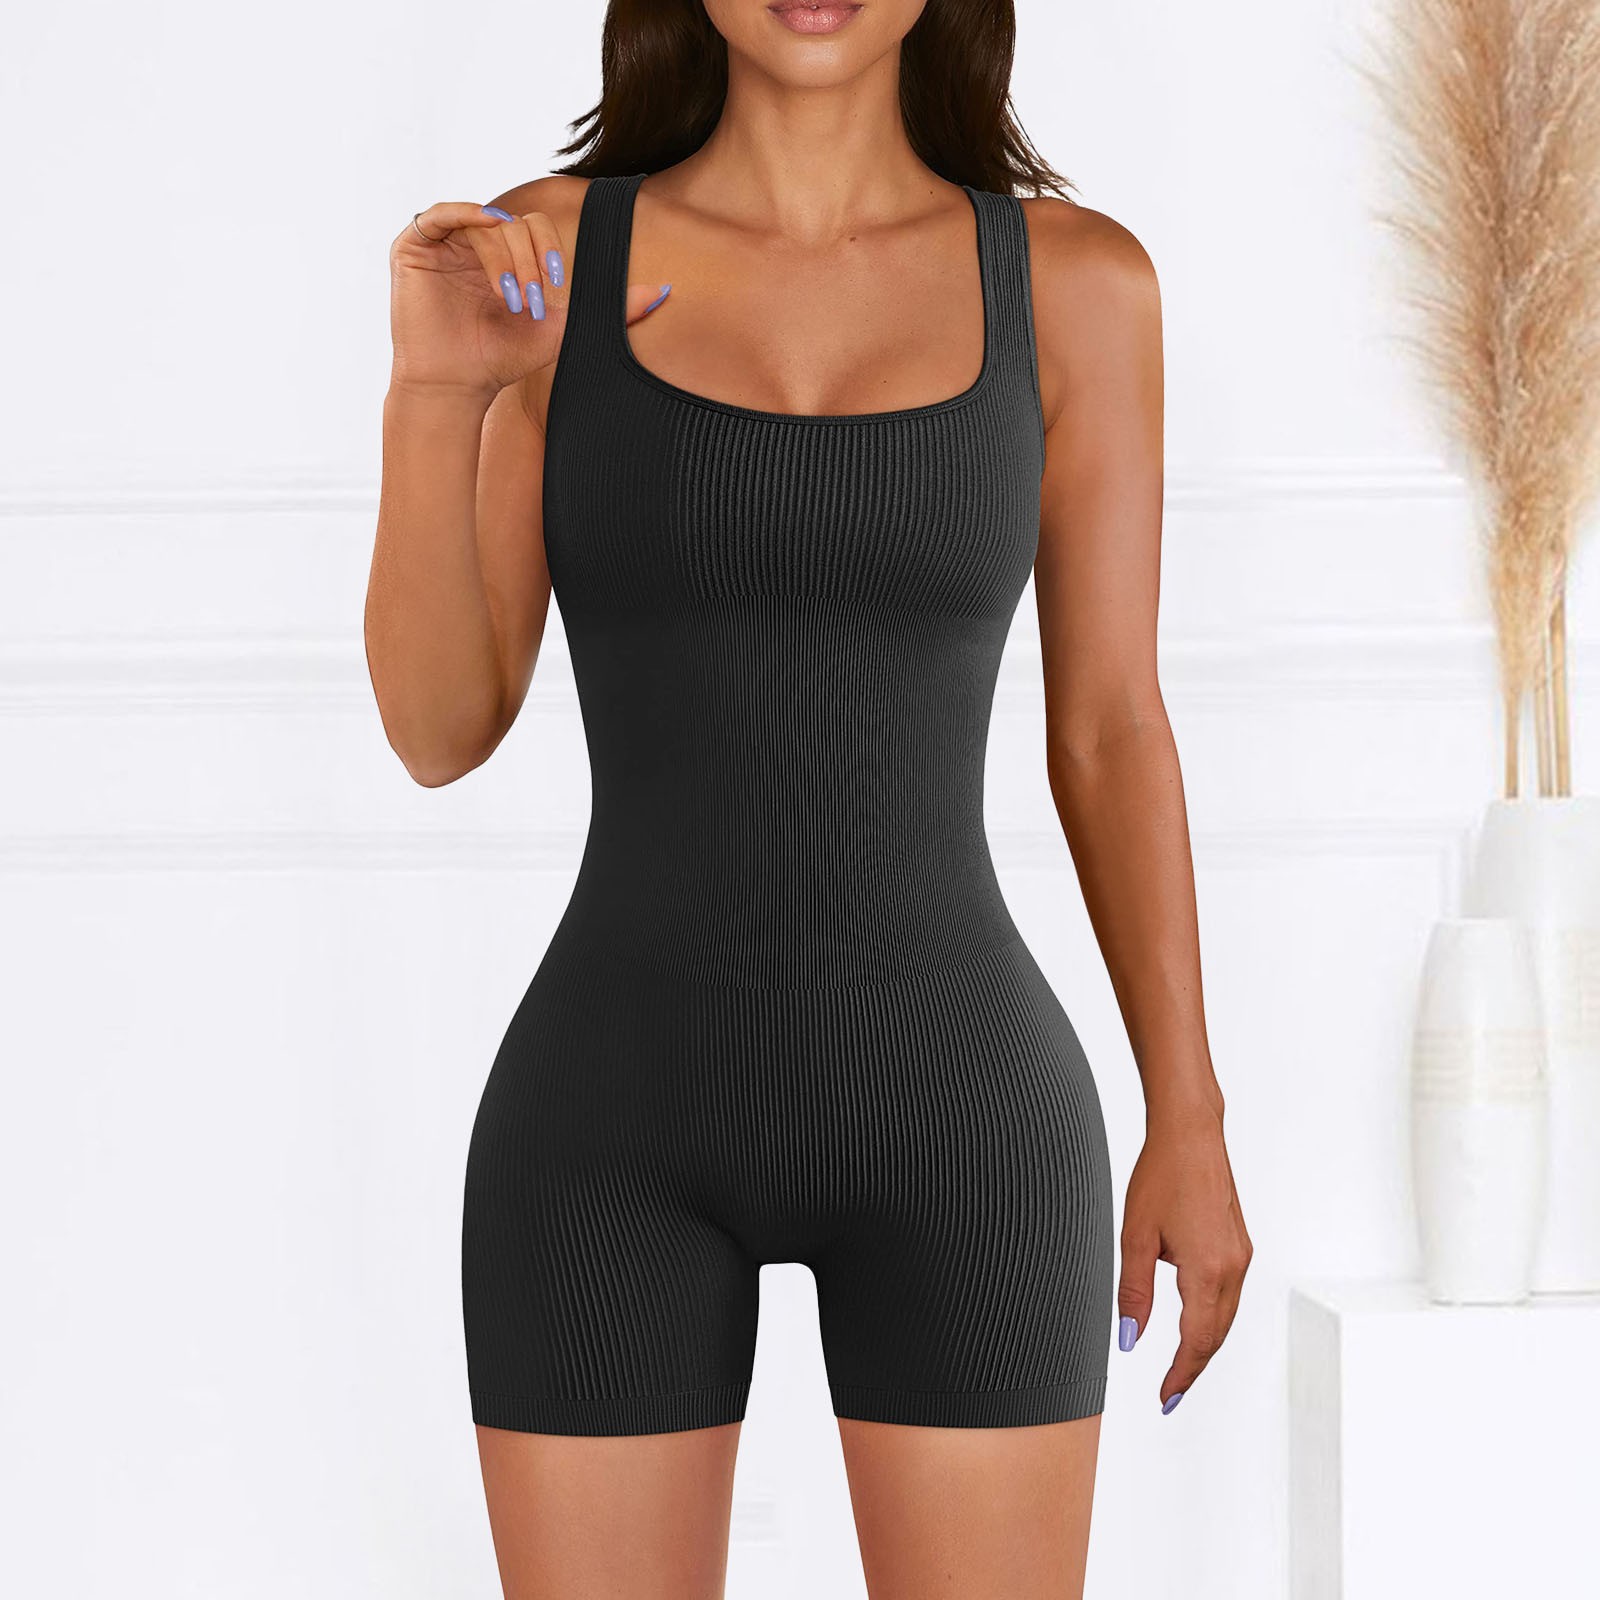 European and American Seamless Thread Jumpsuit Amazon Backless Waist Trimming Tight Sports Yoga Jumpsuit